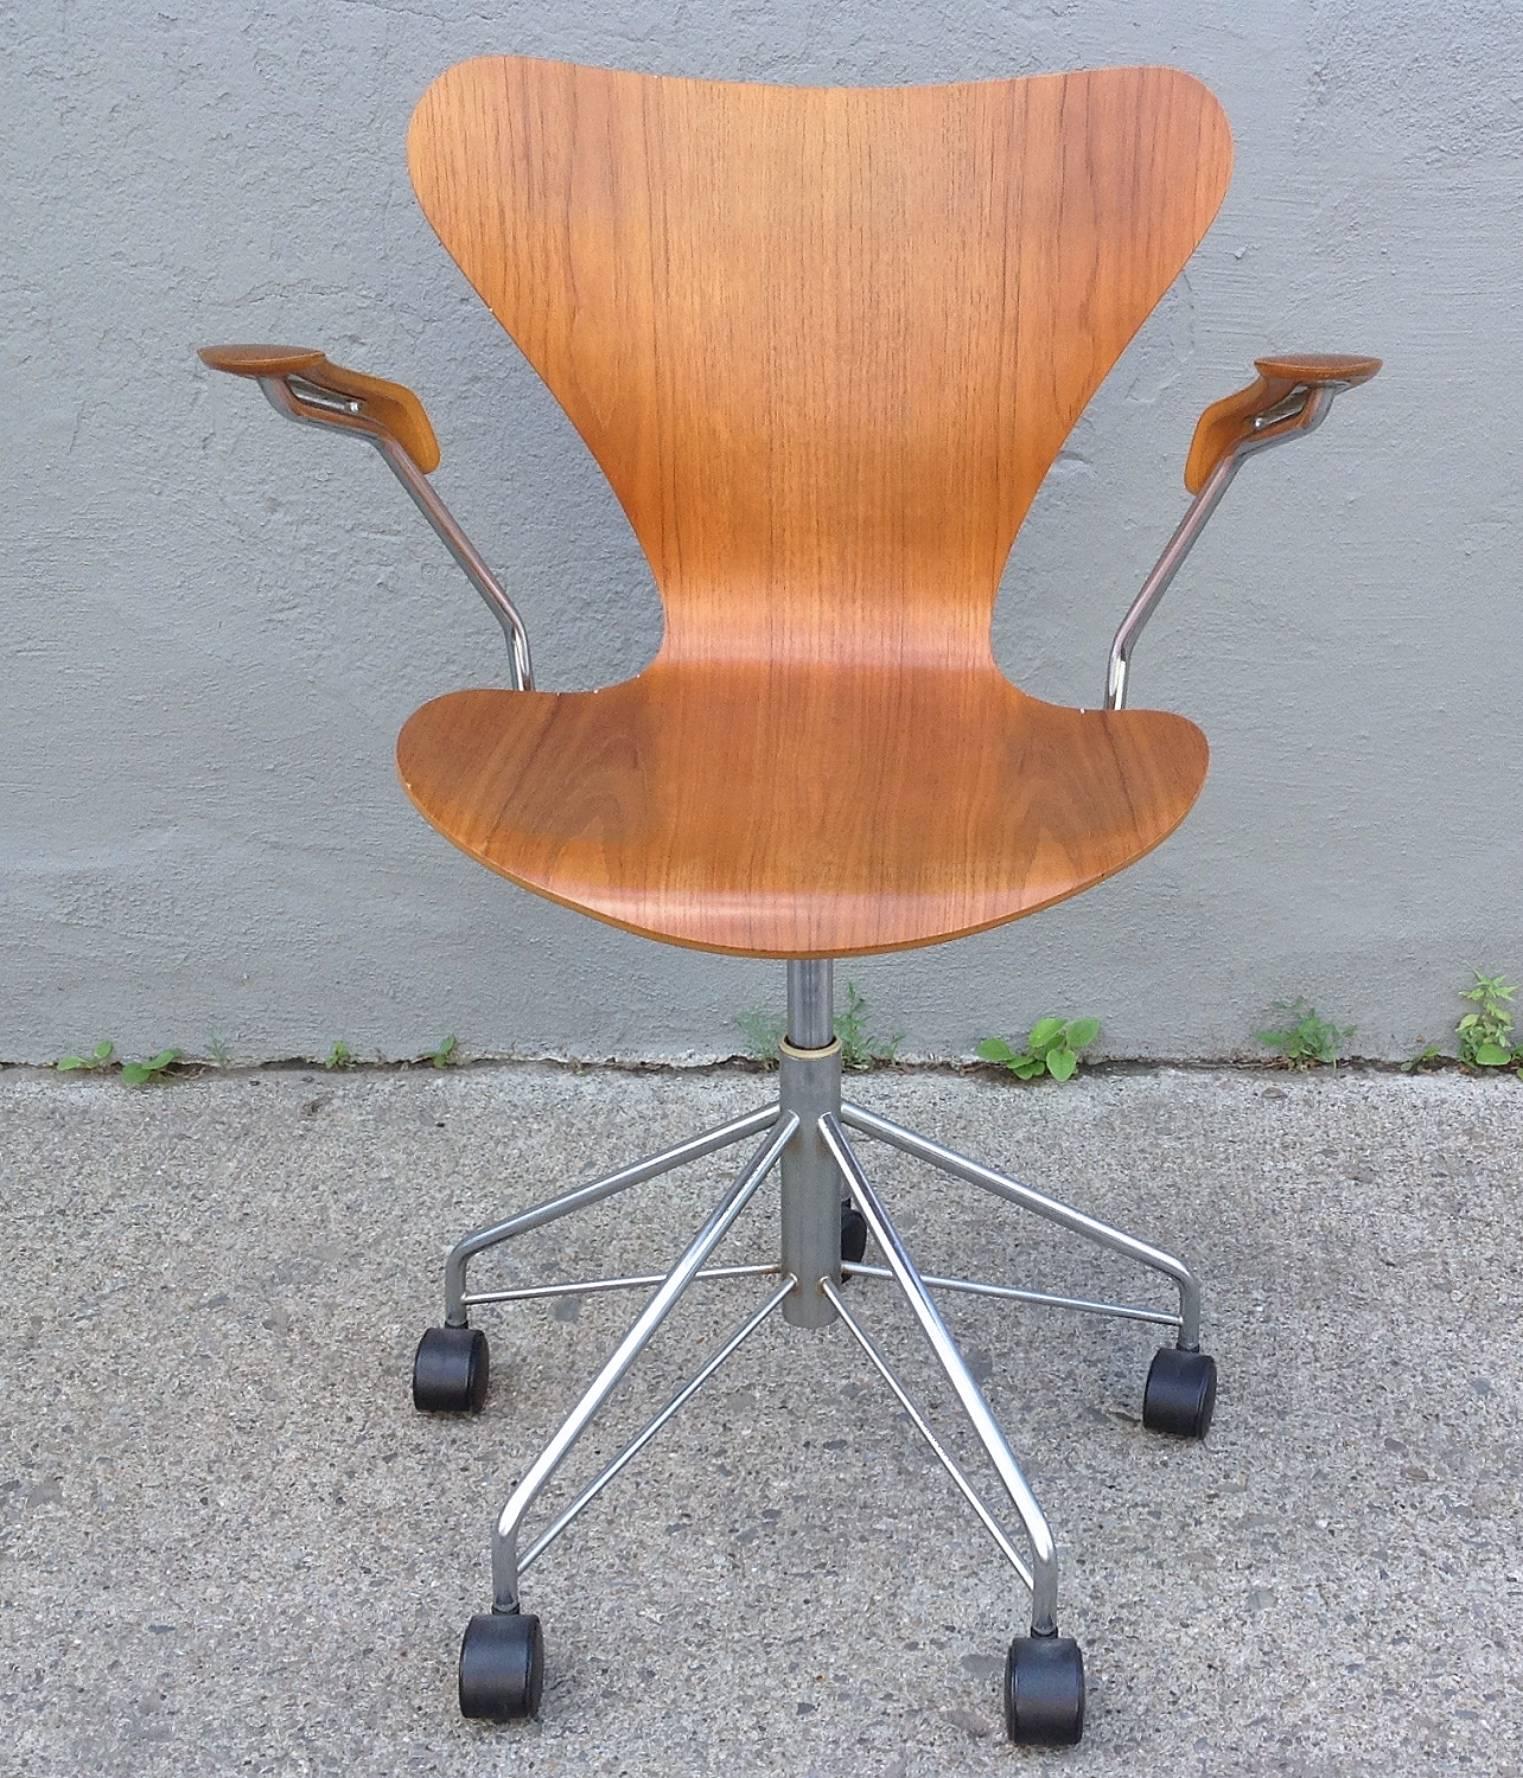 Designed in 1955 by Arne Jacobsen for Fritz Hansen. Rolling desk chair in teak with teak arms produced in 1978. Adjustable seat height, swivel seat, spring back.